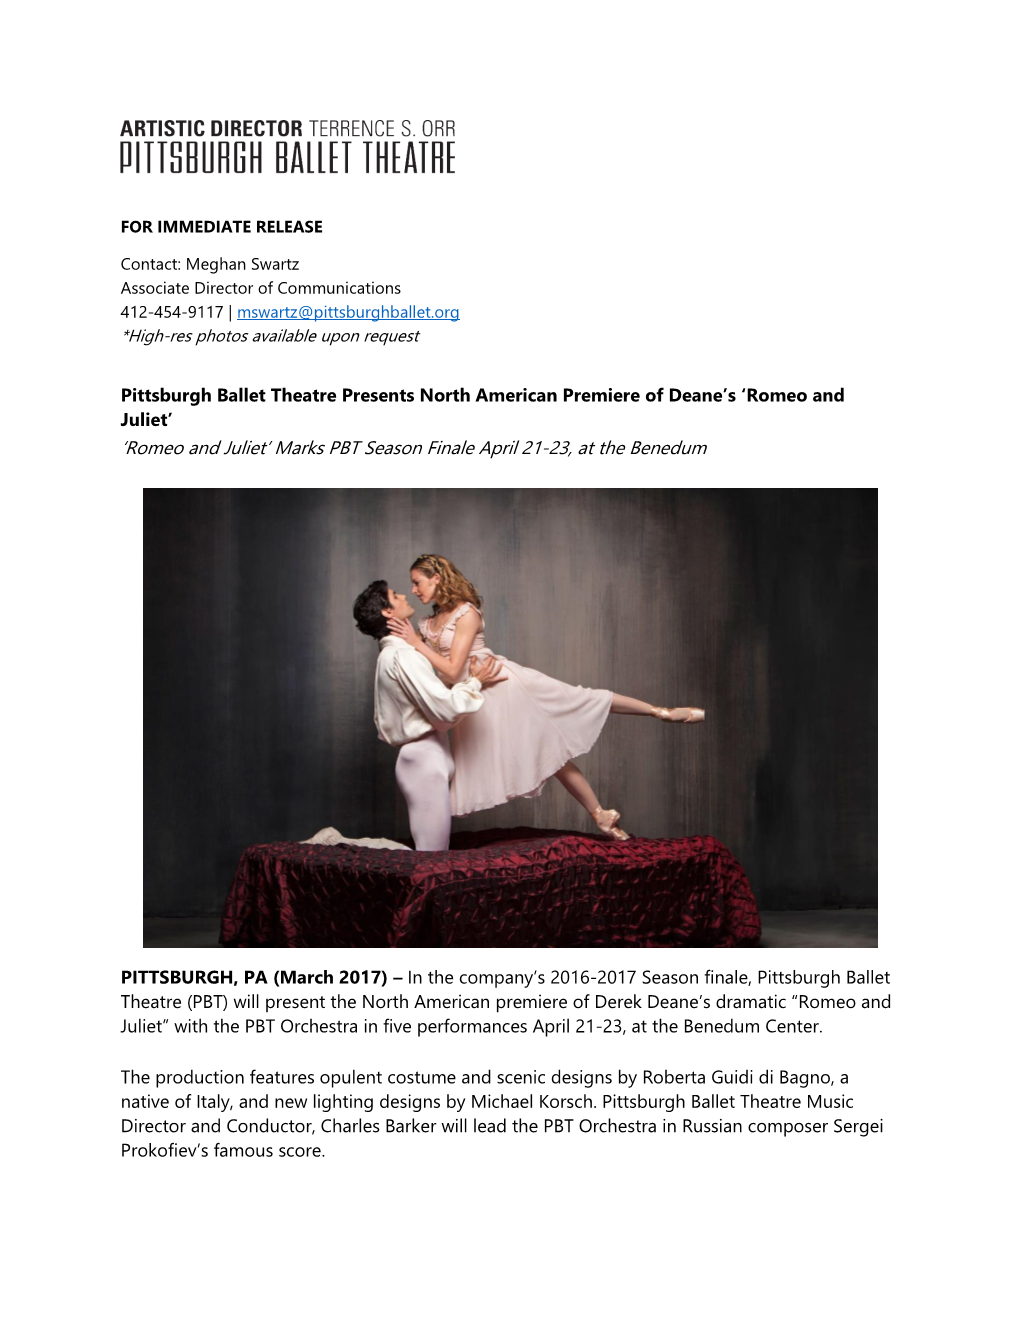 Romeo and Juliet’ ‘Romeo and Juliet’ Marks PBT Season Finale April 21-23, at the Benedum